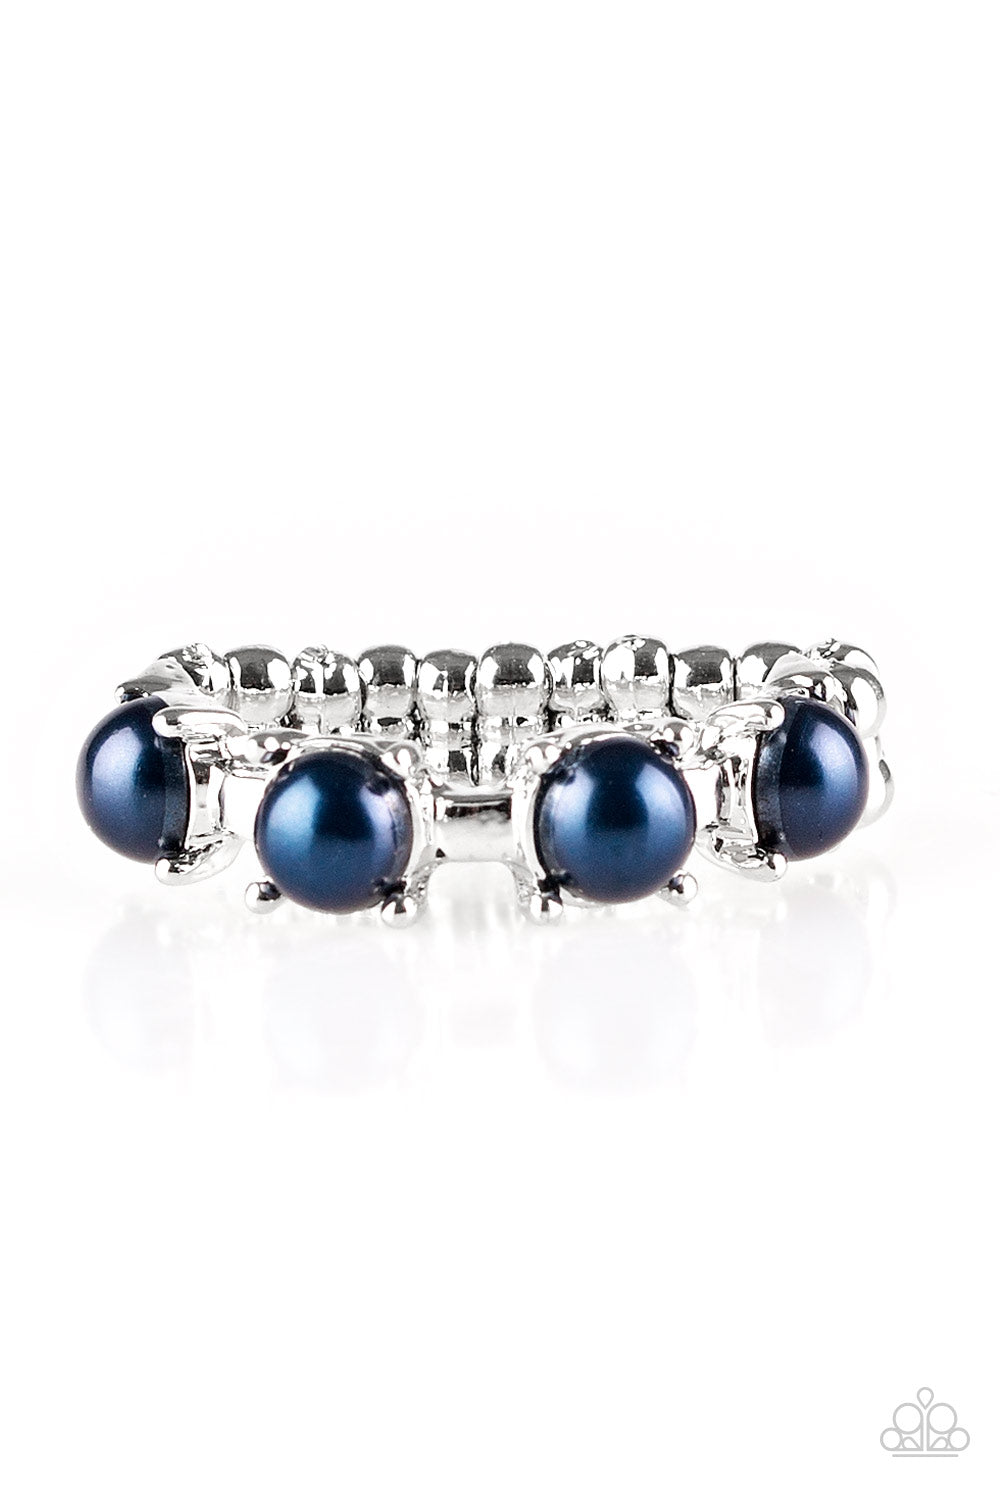 Paparazzi Accessories More Or PRICELESS - Blue Ring - Be Adored Jewelry